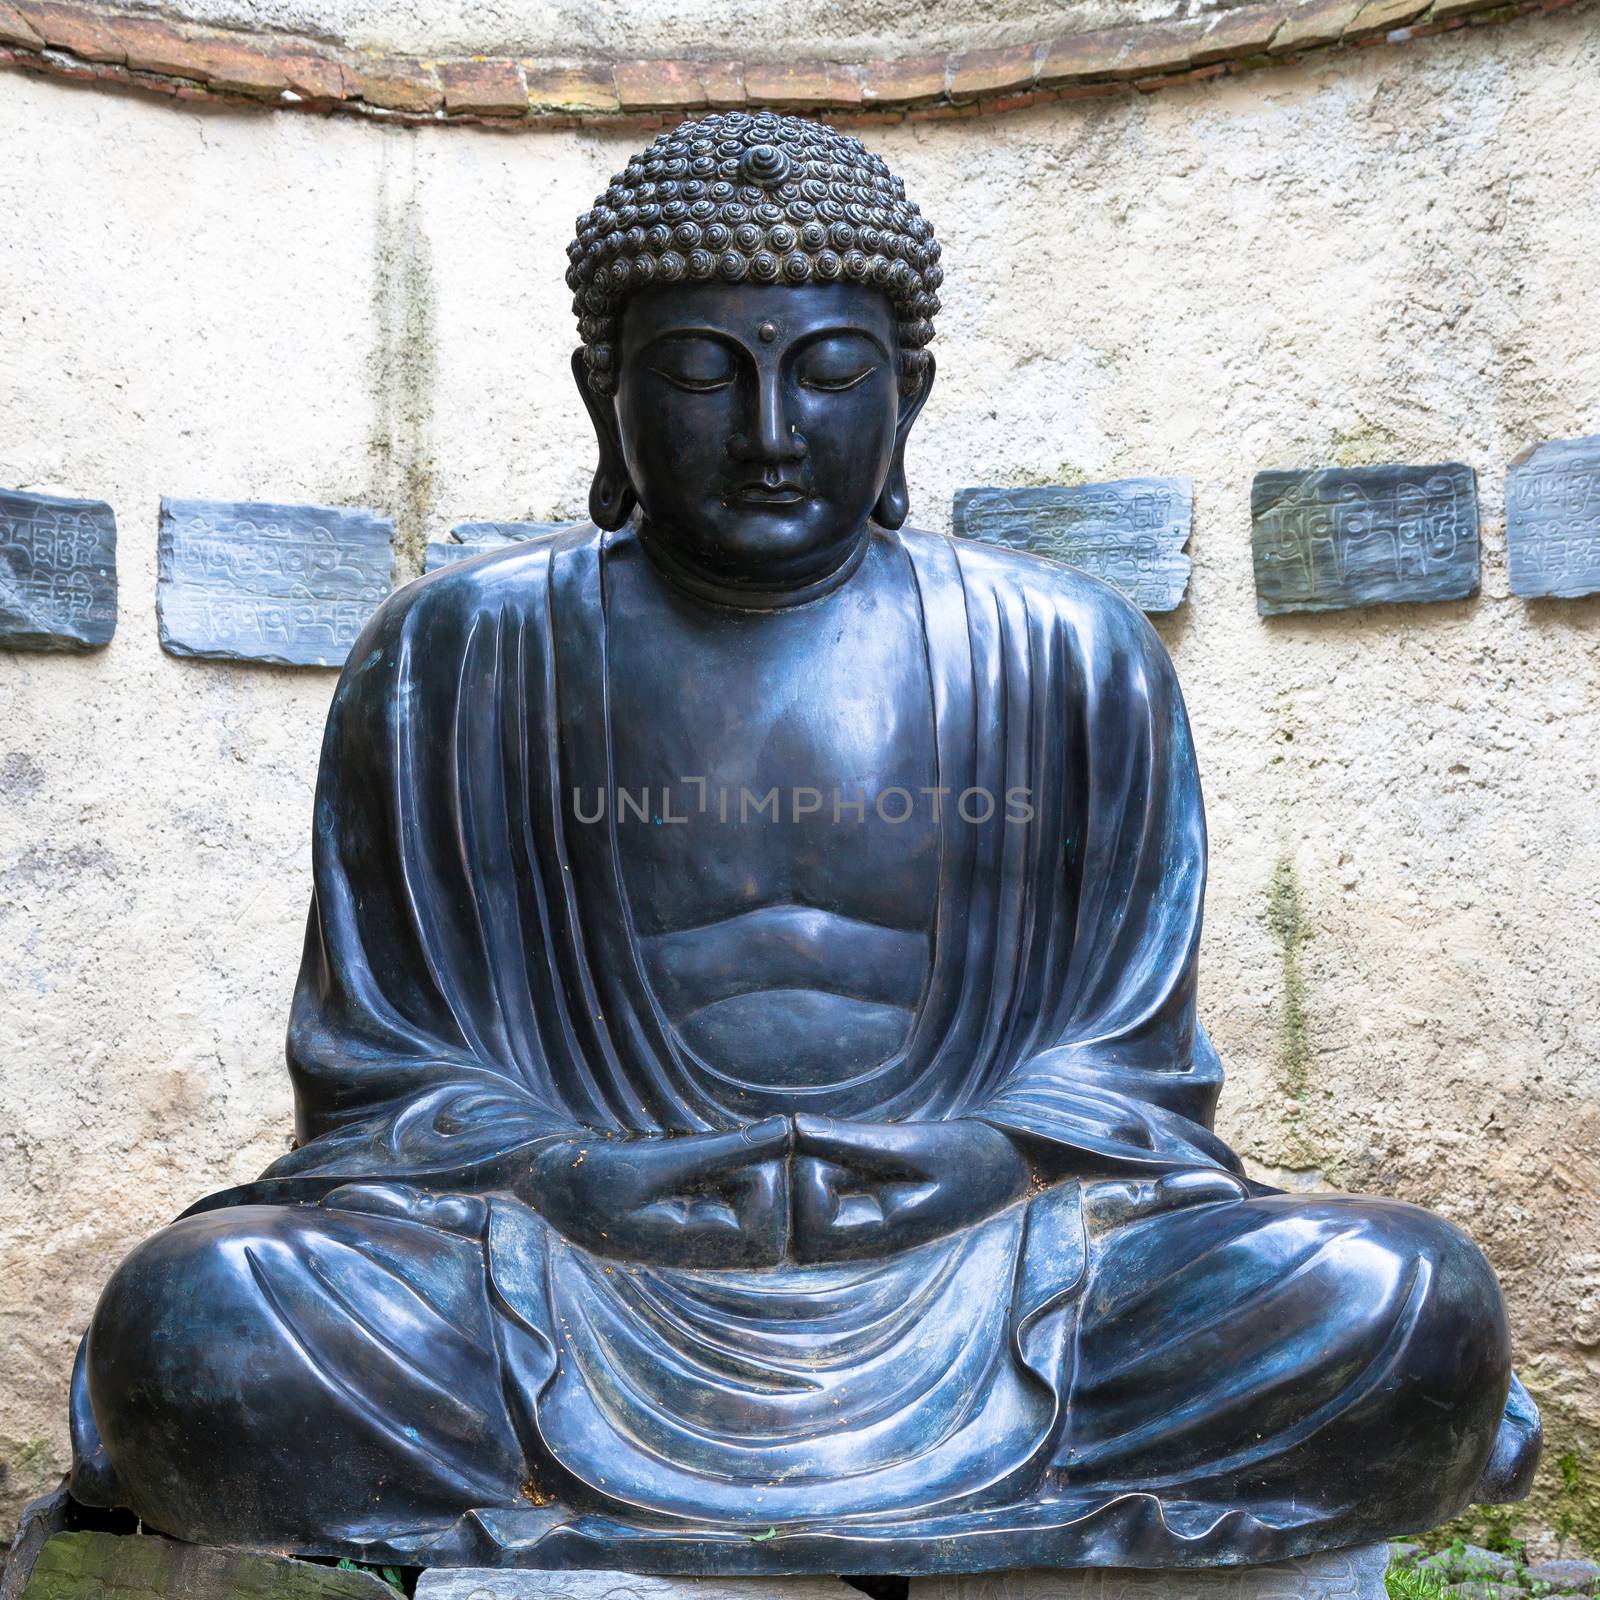 Made in bronze, c.a. 1860, meditating position. Useful for concepts related to concentration.